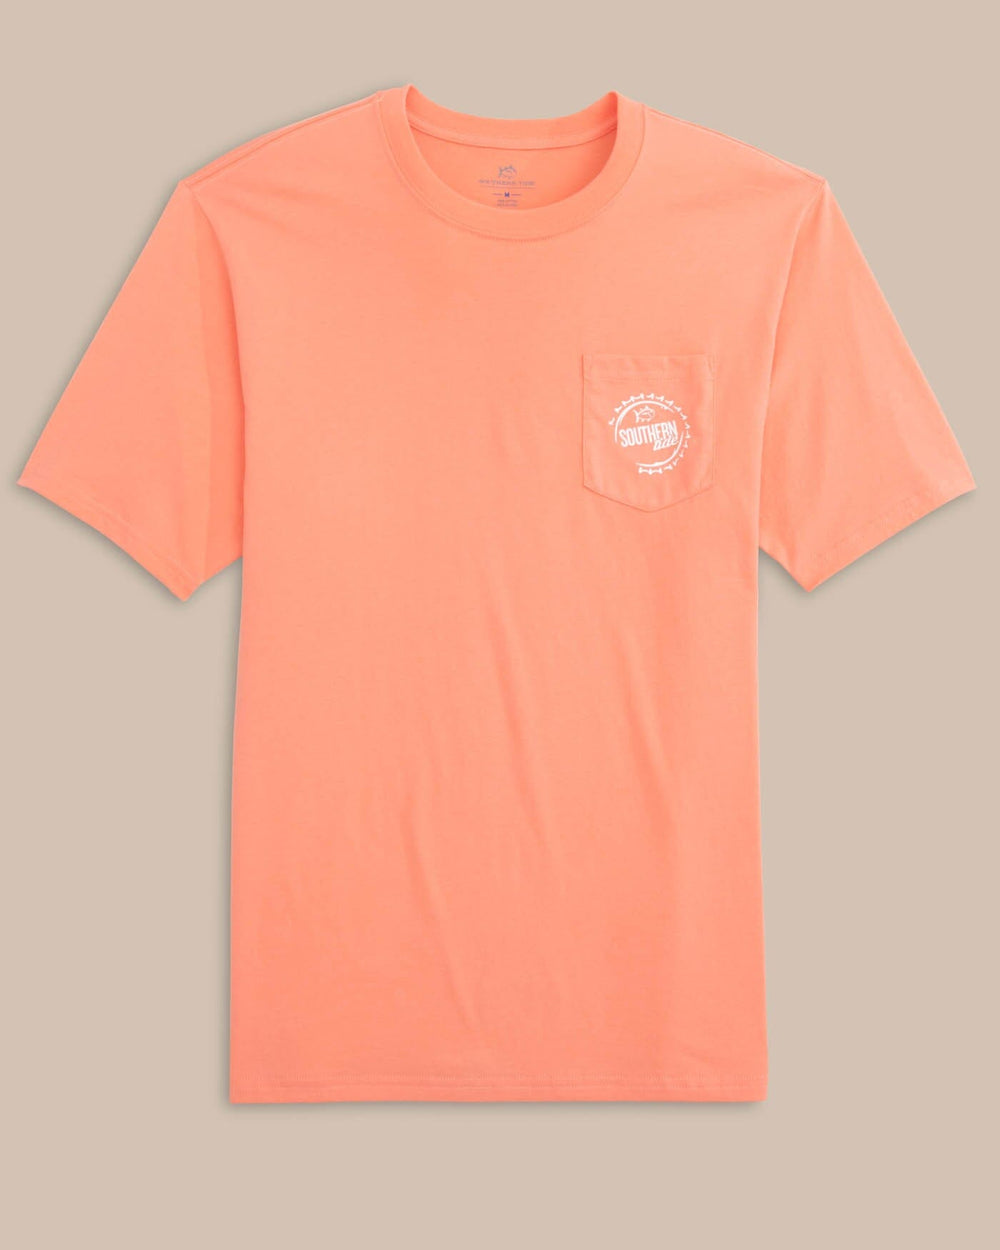 The front view of the Southern Tide Caps Off Badge Short Sleeve T-shirt by Southern Tide - Desert Flower Coral